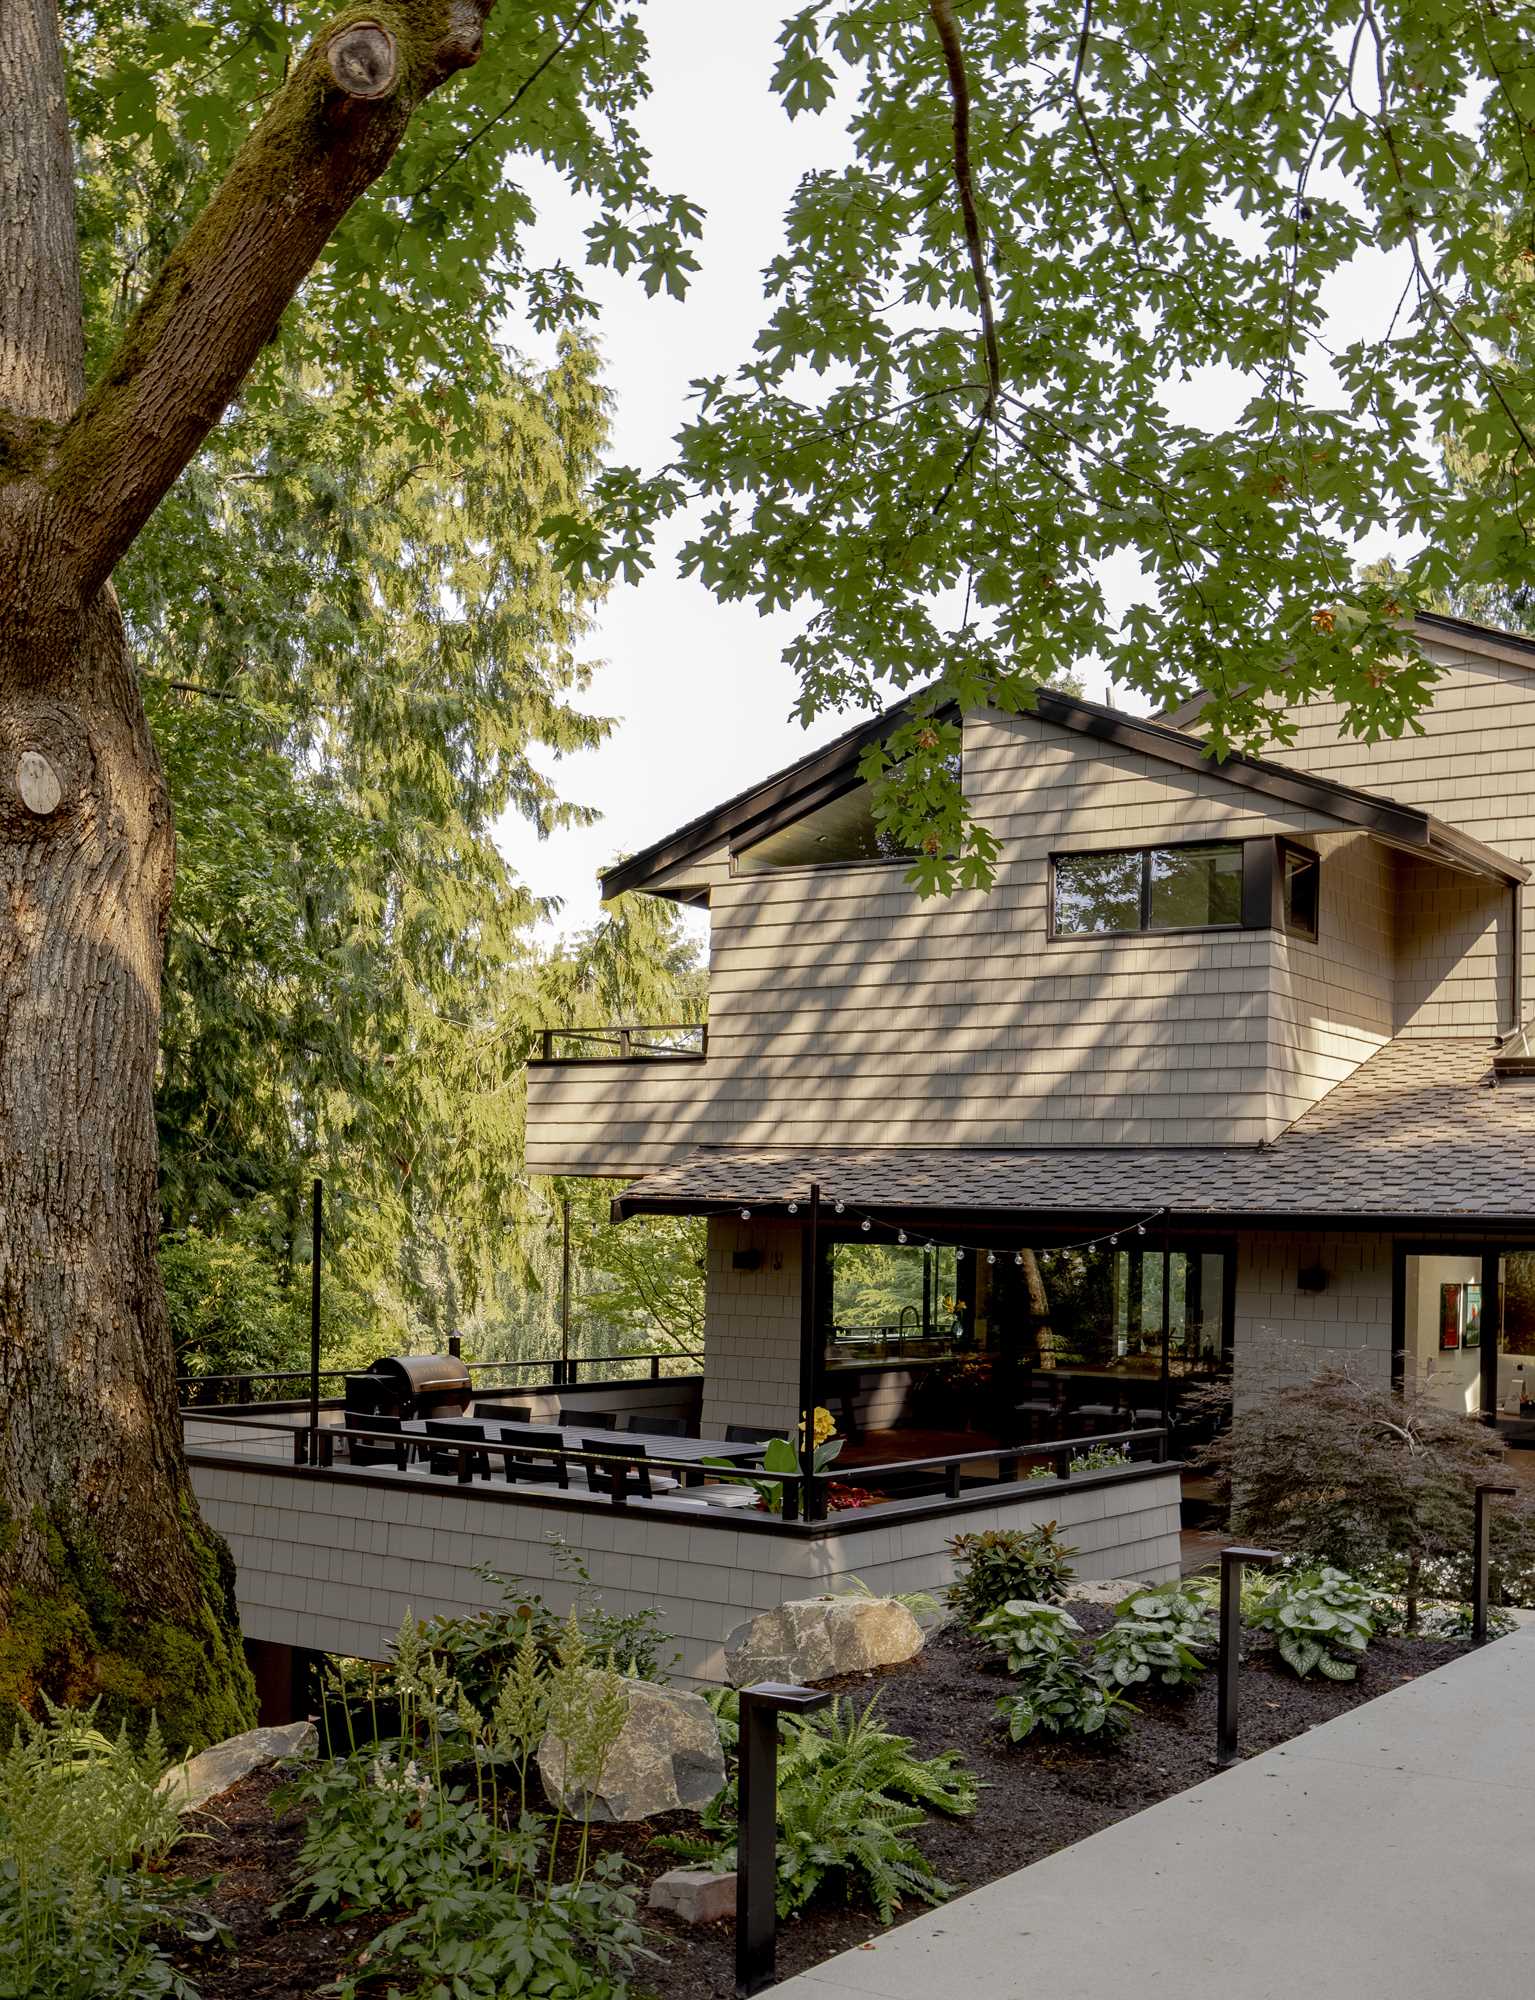 The contemporary remodel of a 1970s home included an updated exterior and interior, and a new deck.